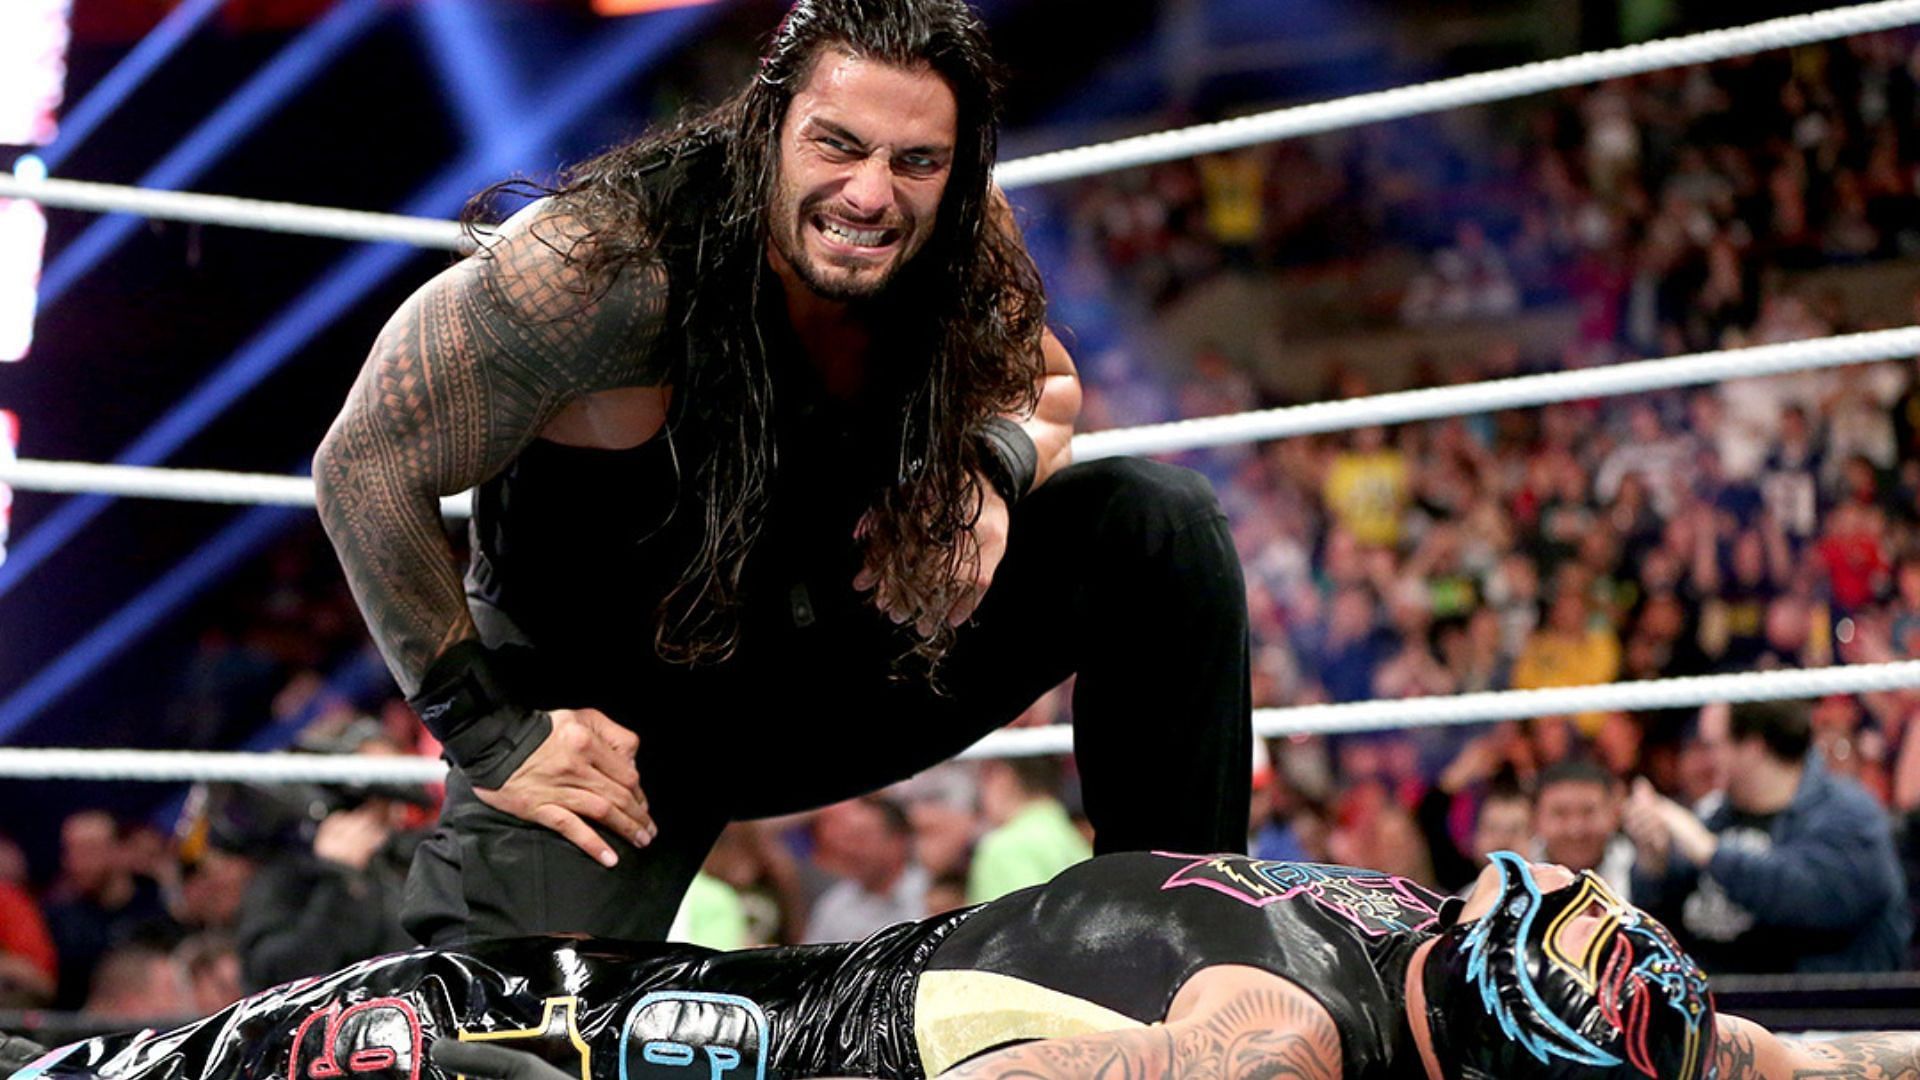 Roman Reigns pinned four out of five superstars in the traditional tag match at WWE Survivor Series 2013